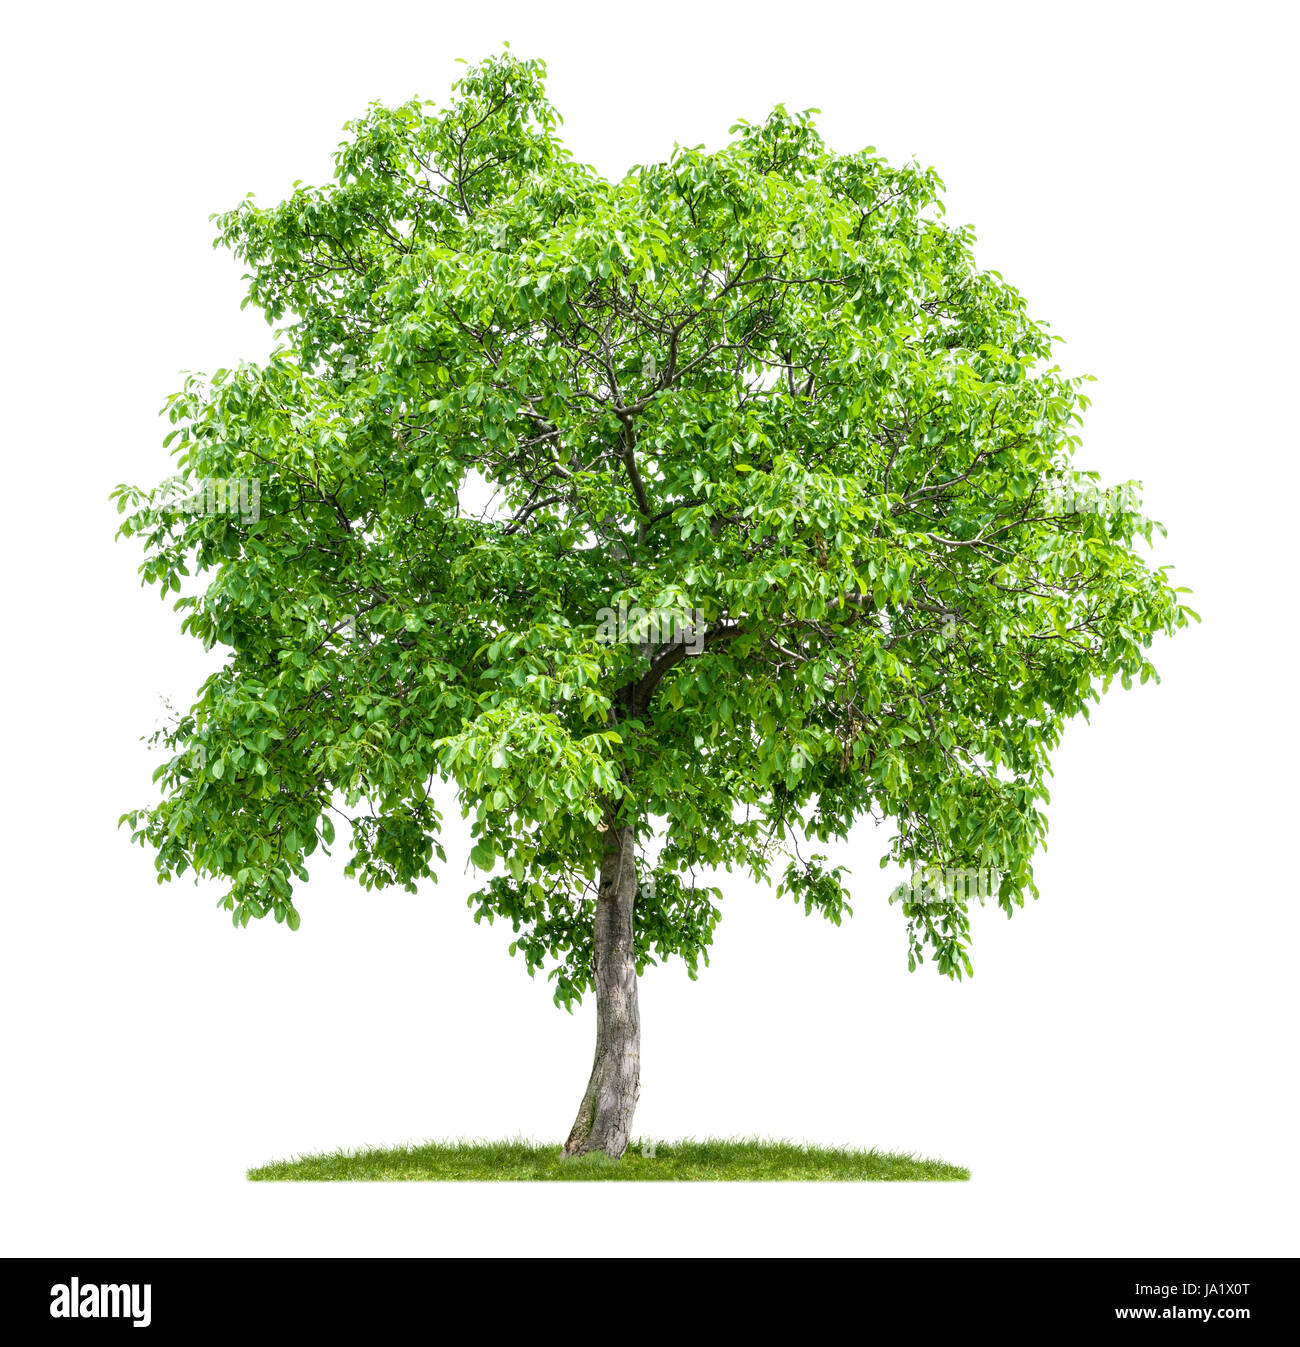 exempted walnut tree in front of a white background Stock Photo